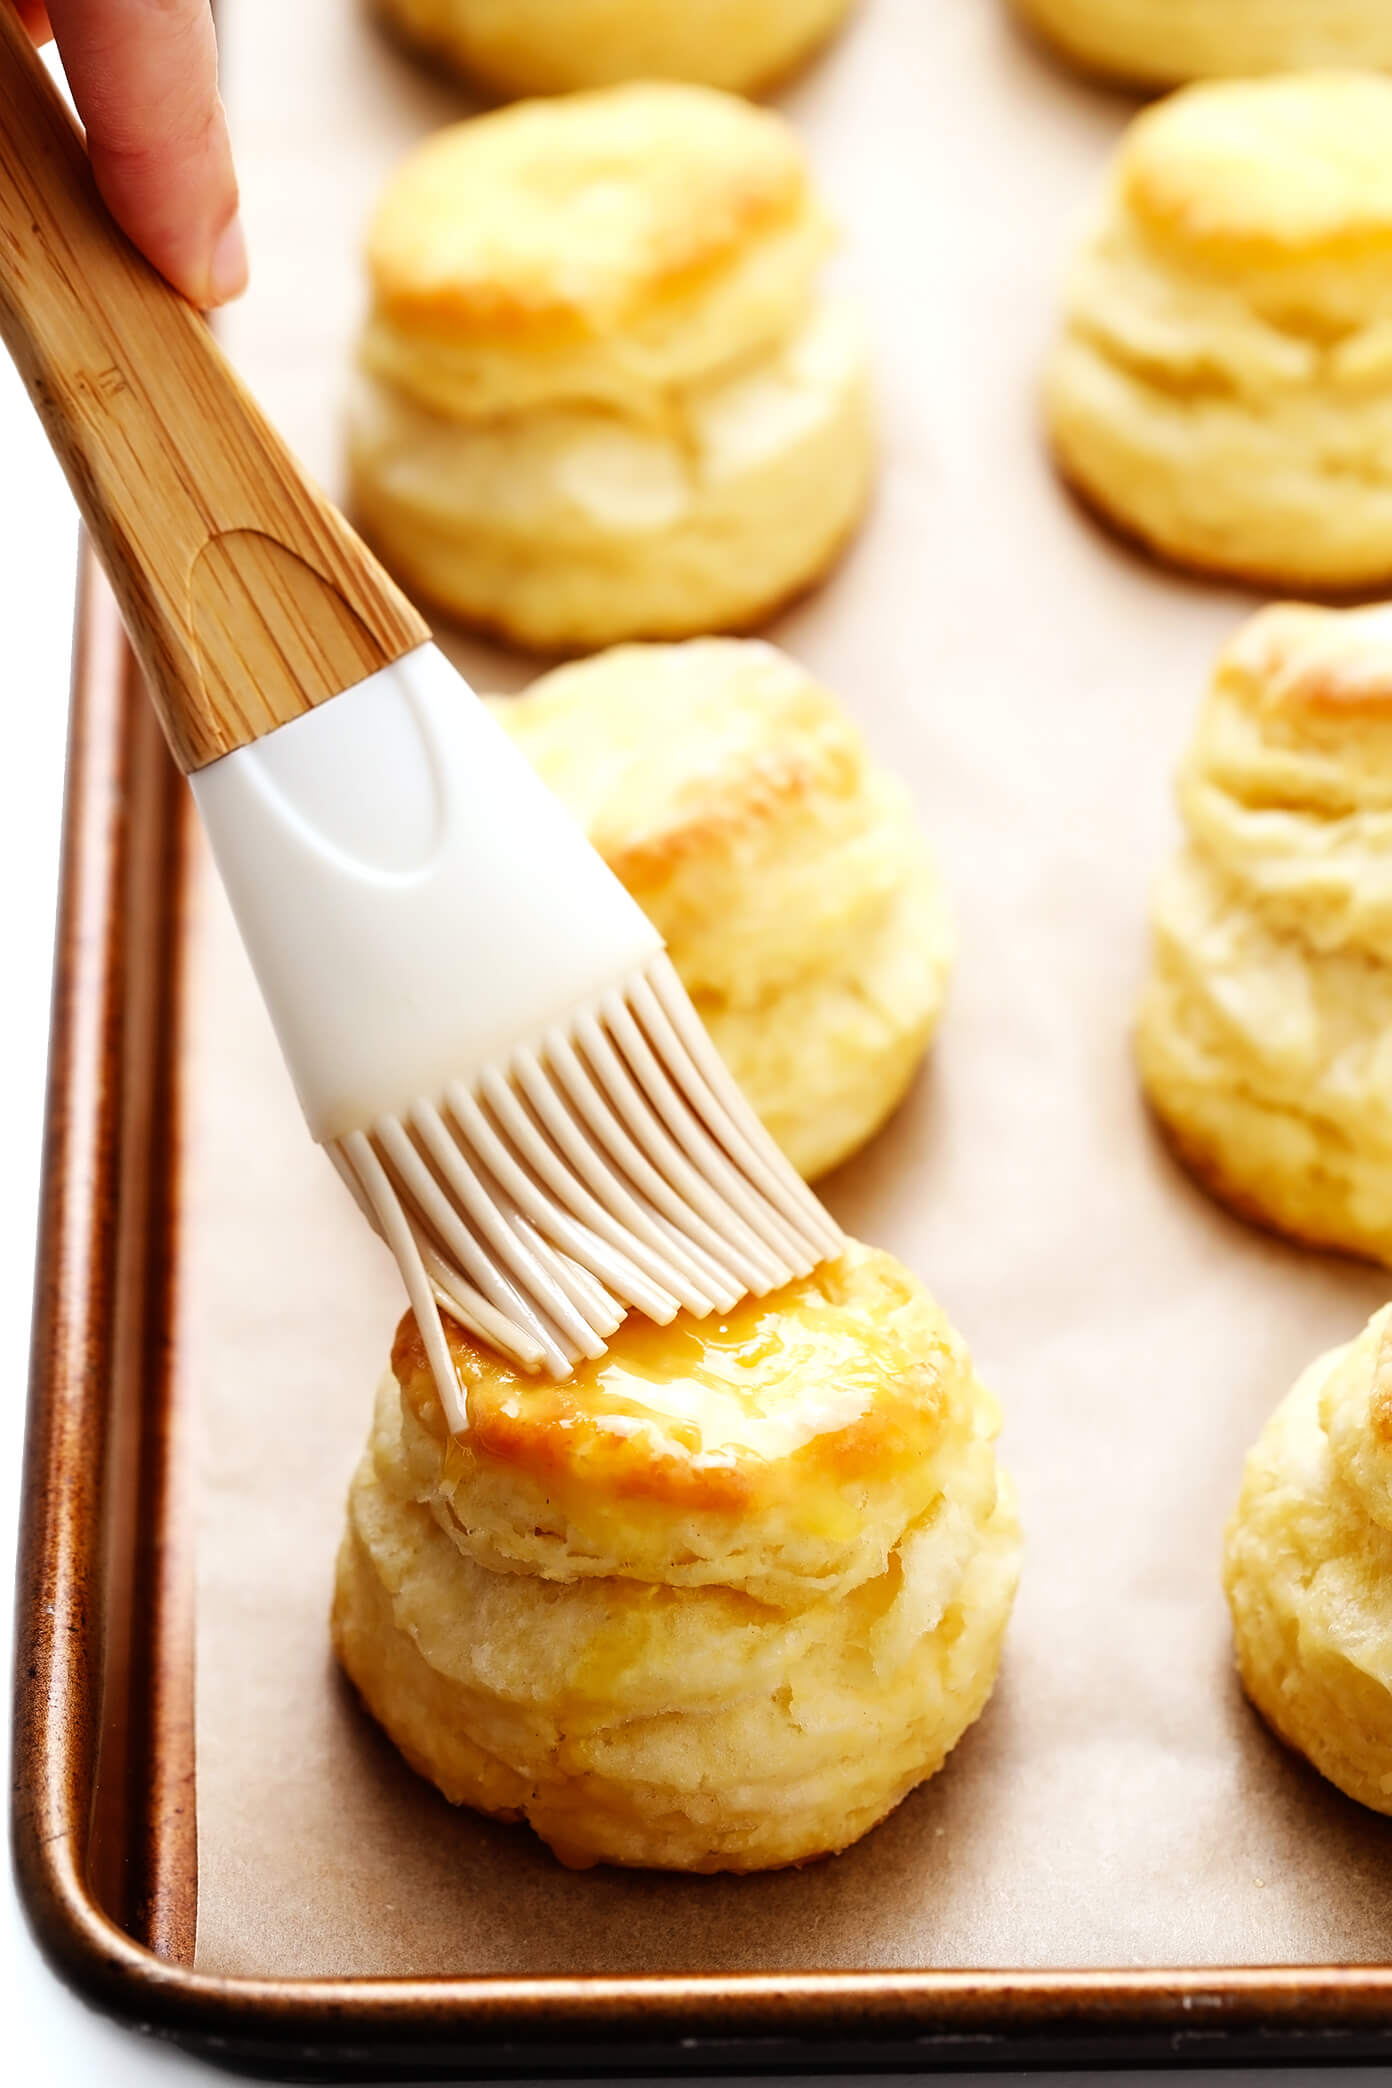 Brushing butter on homemade biscuits